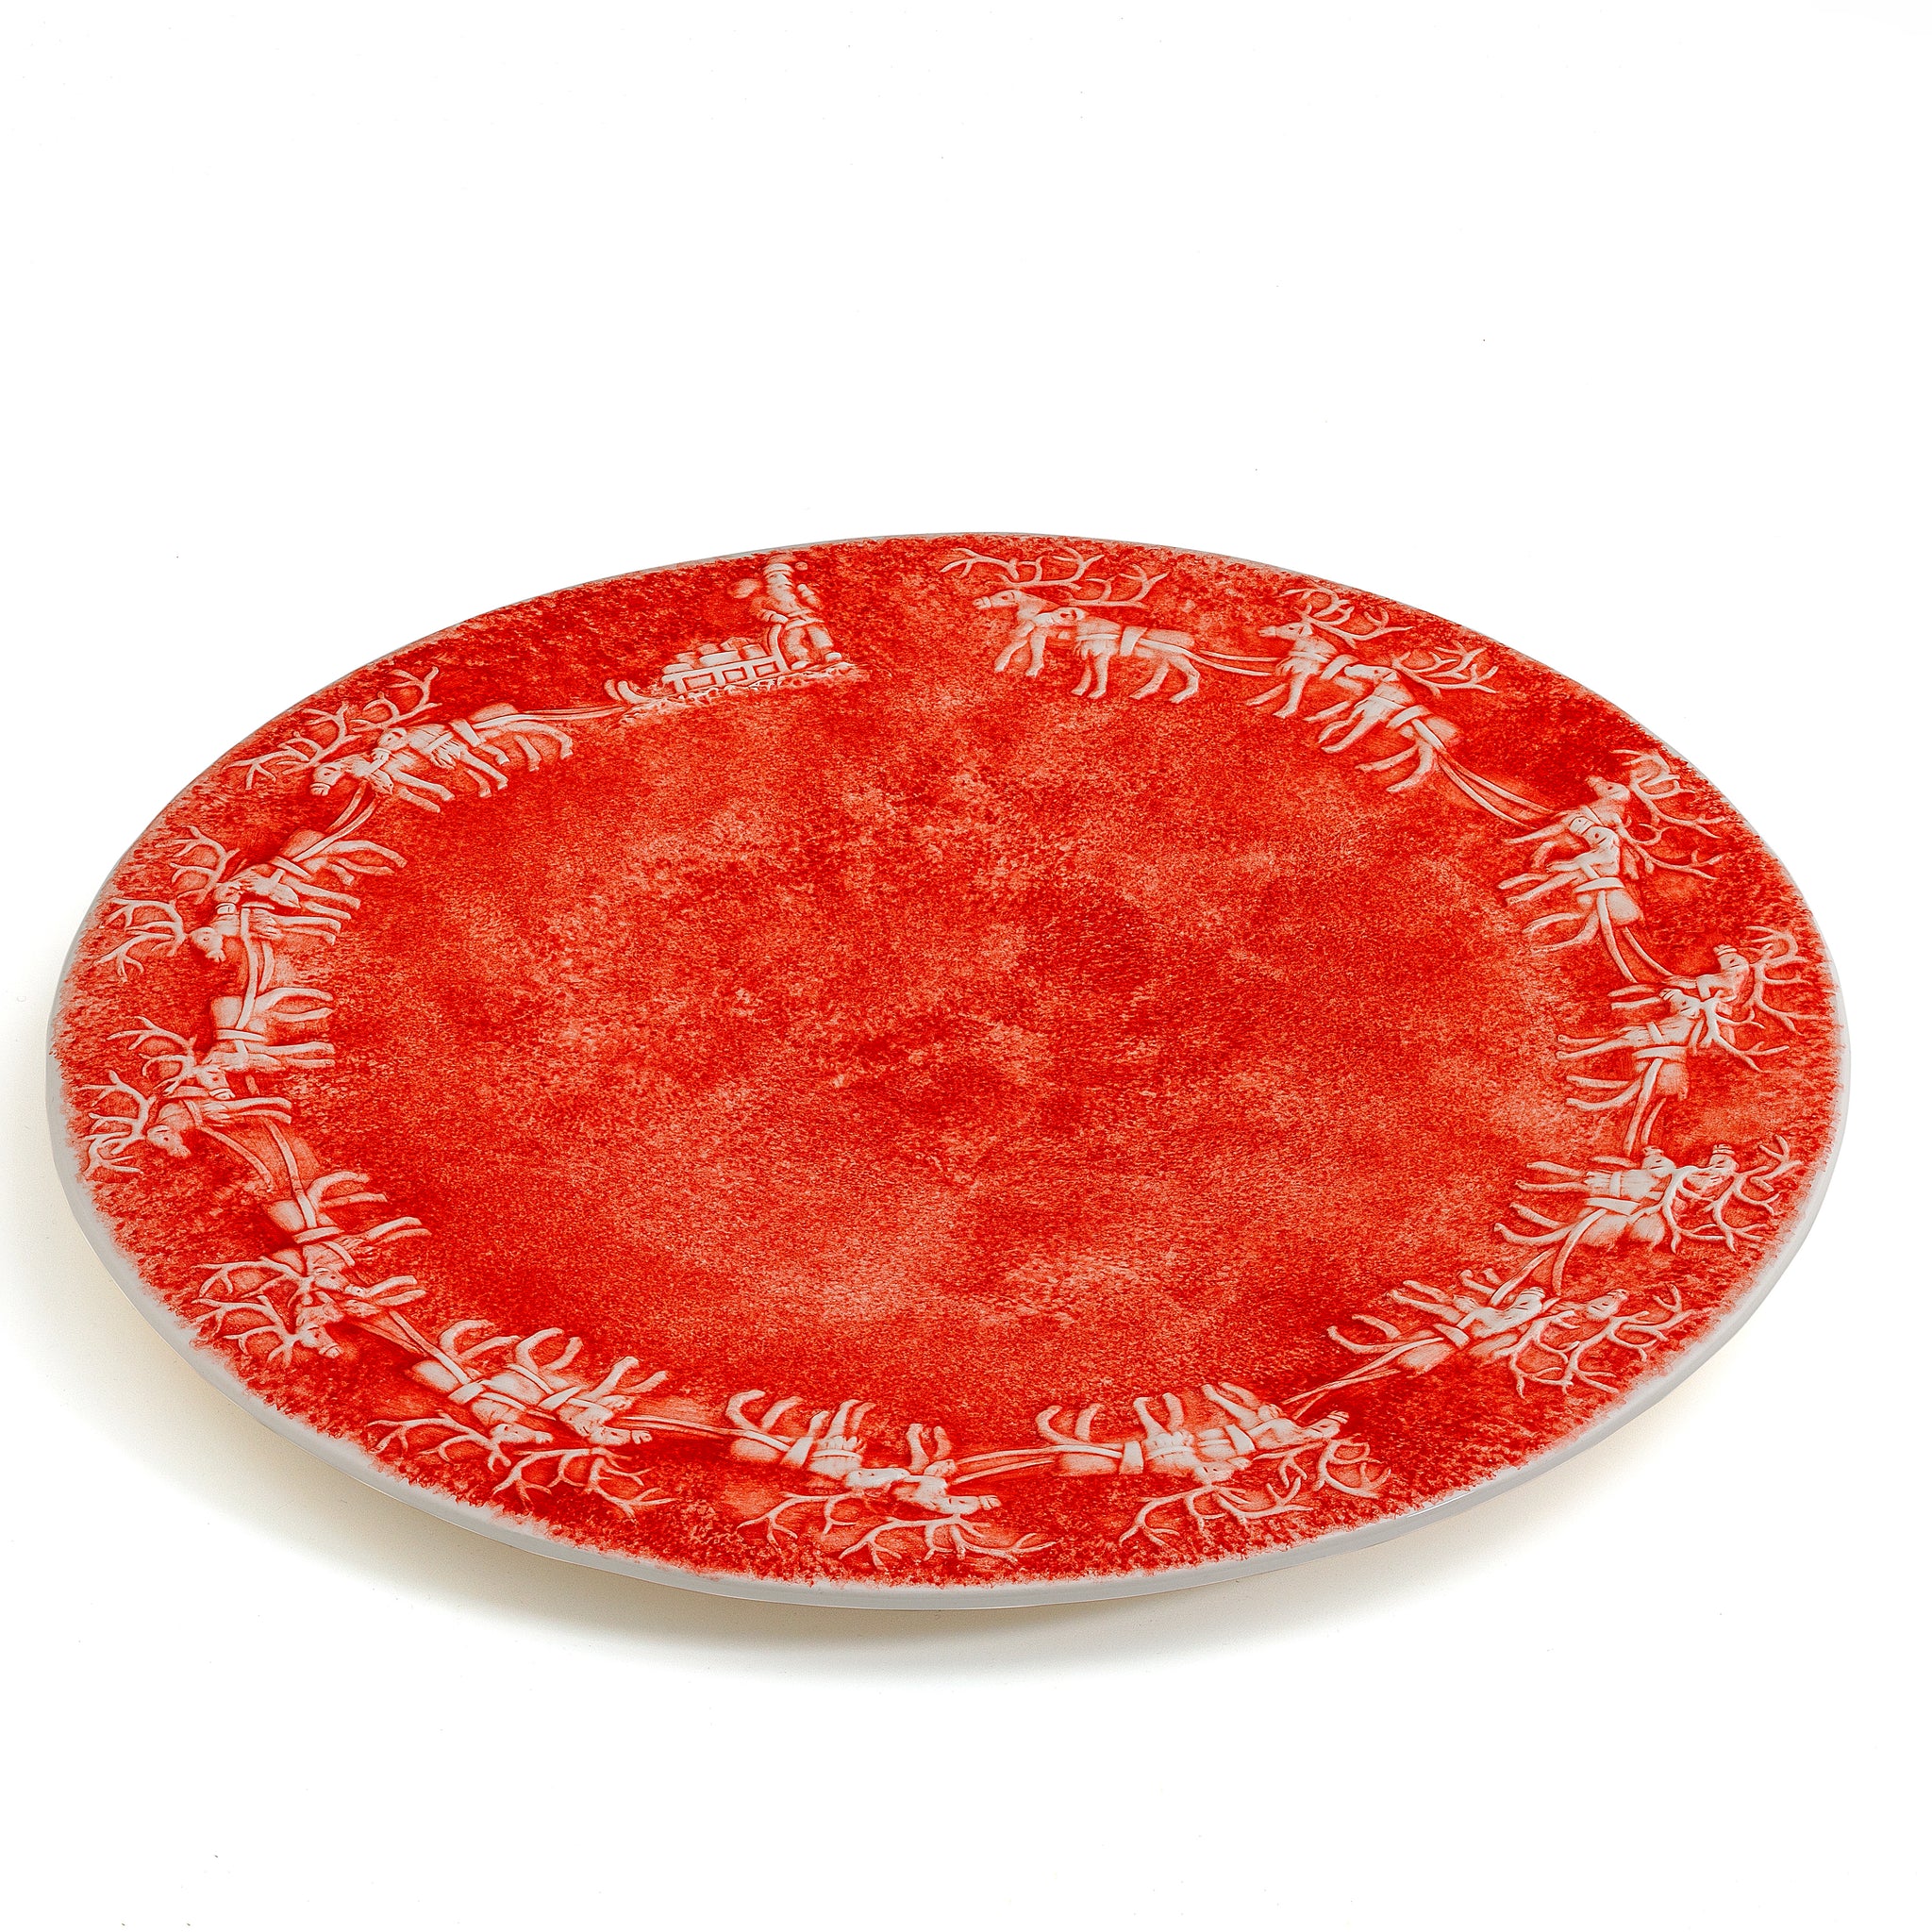 Reindeer Cheer 14.1” Round Platter, Red with White Reindeer Christmas Design, Made in Italy 